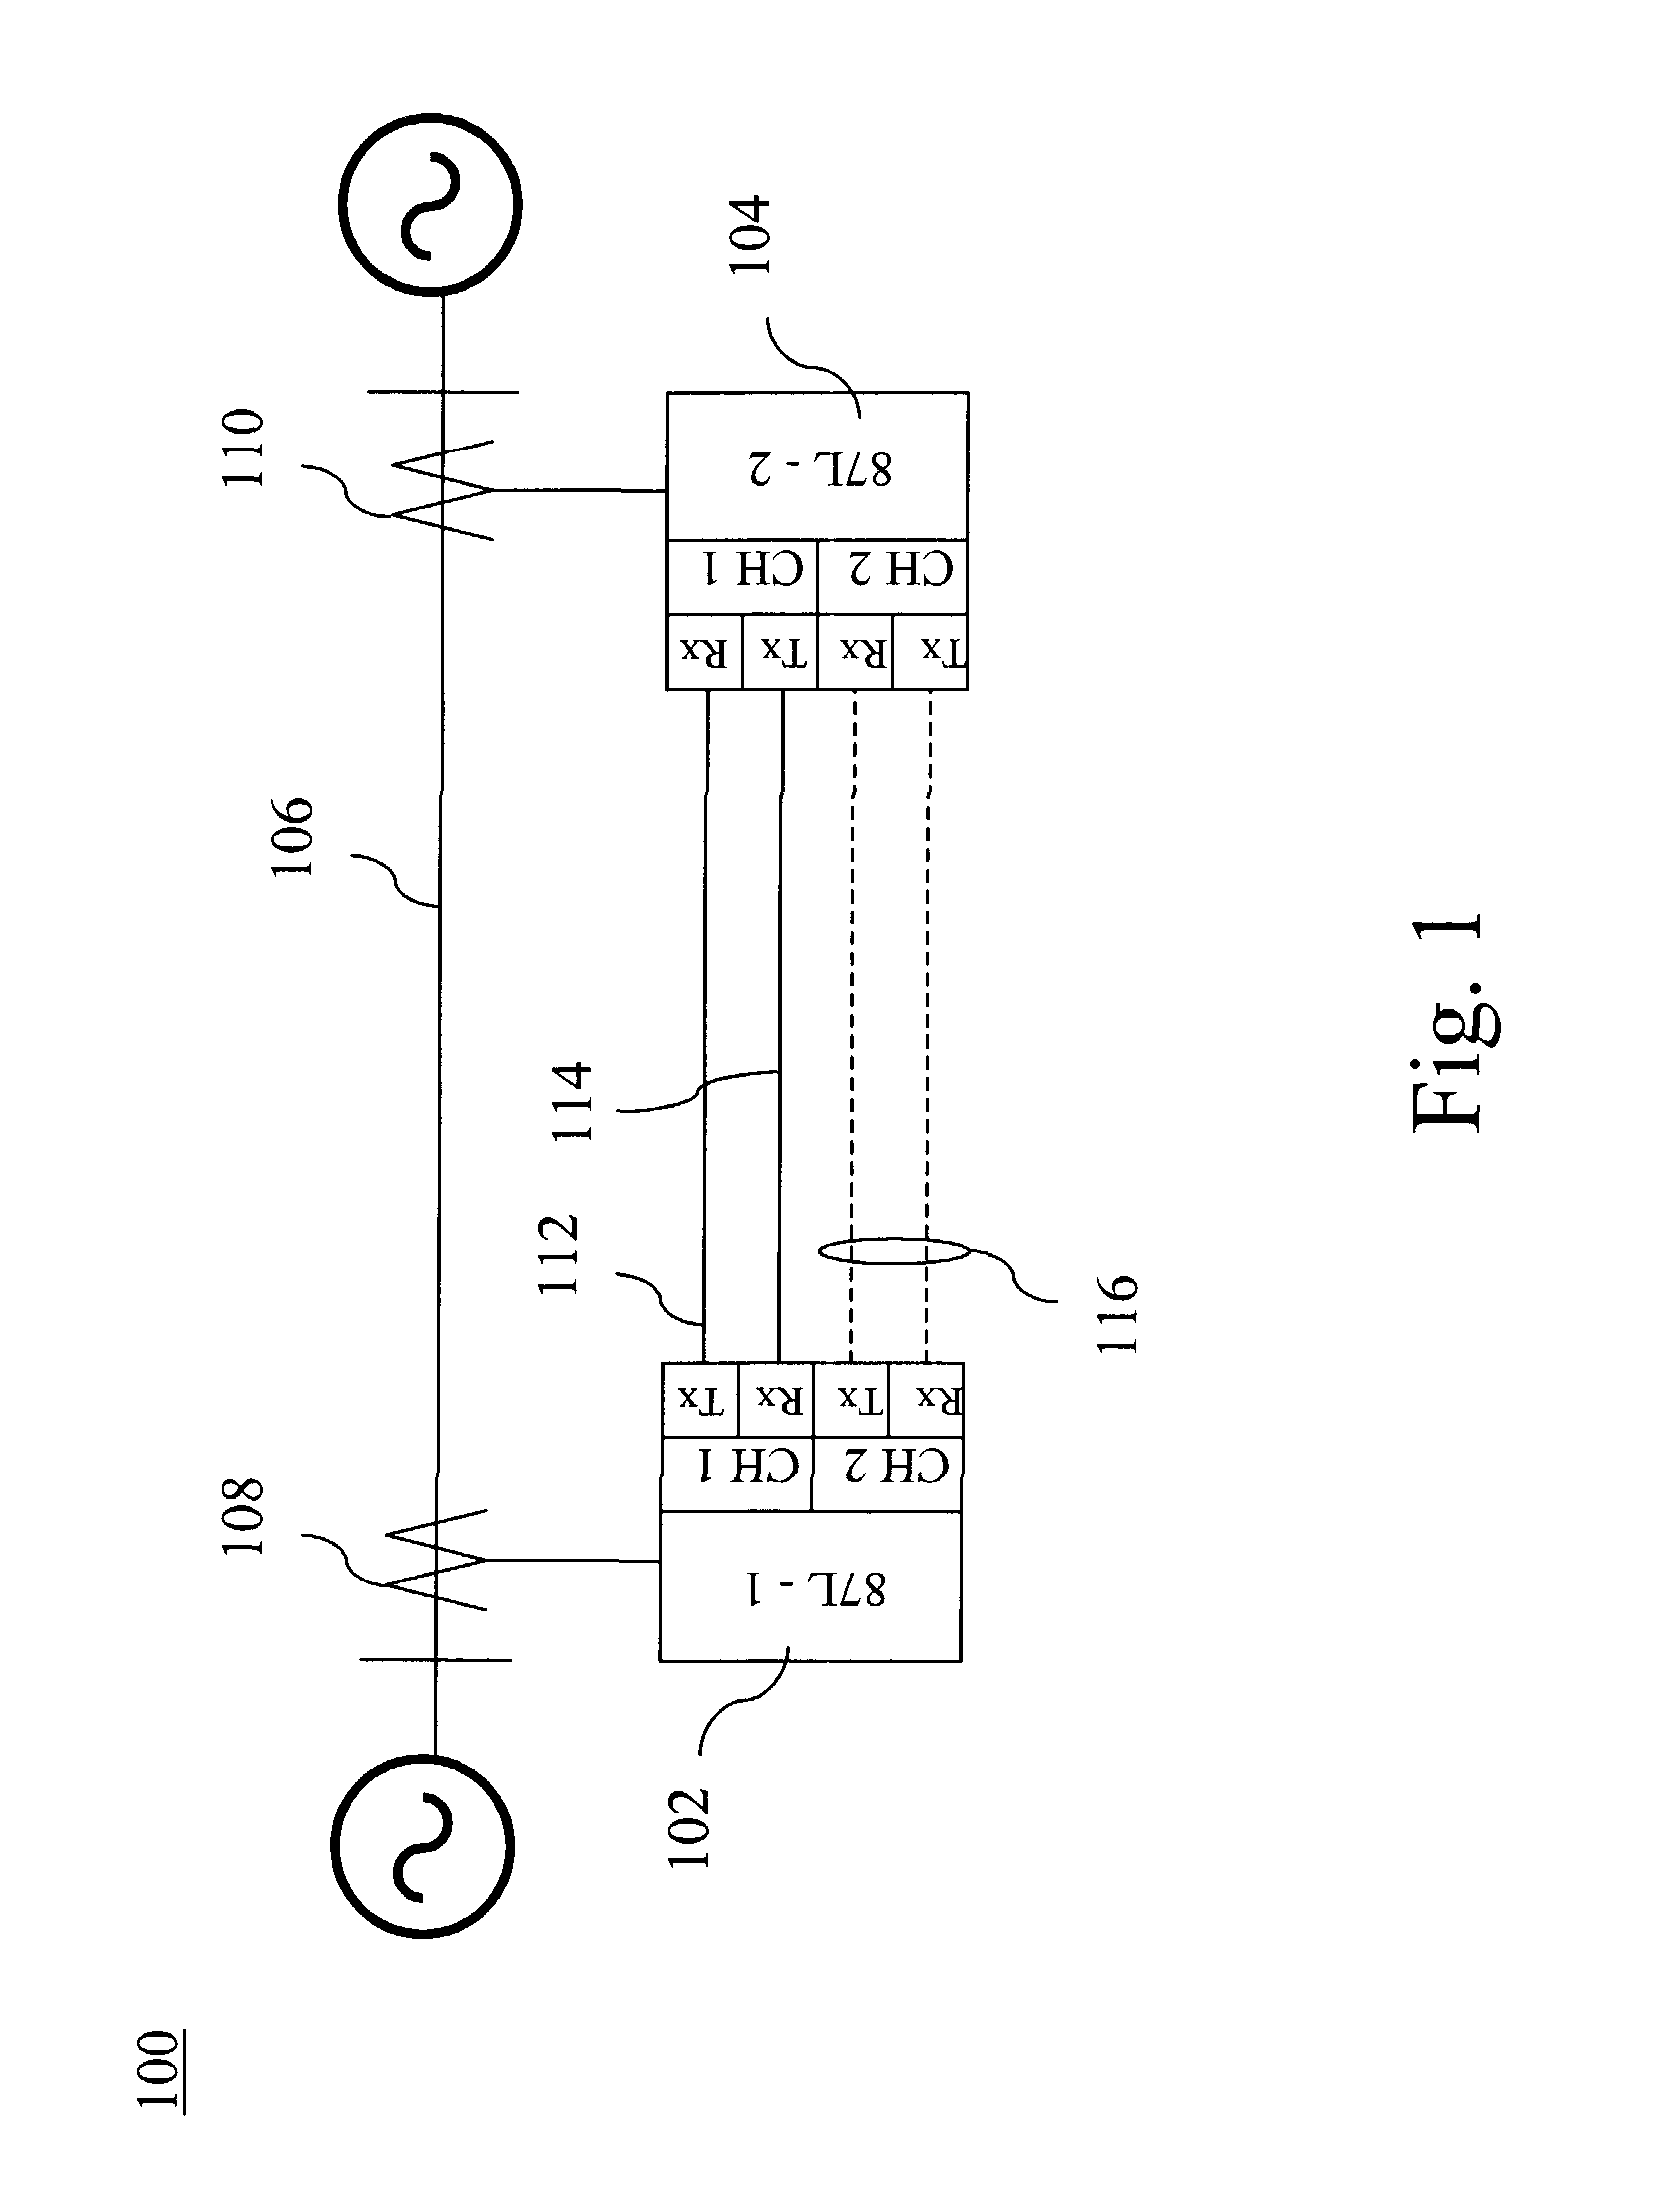 Method and system for communications channel delay asymmetry compensation using global positioning systems